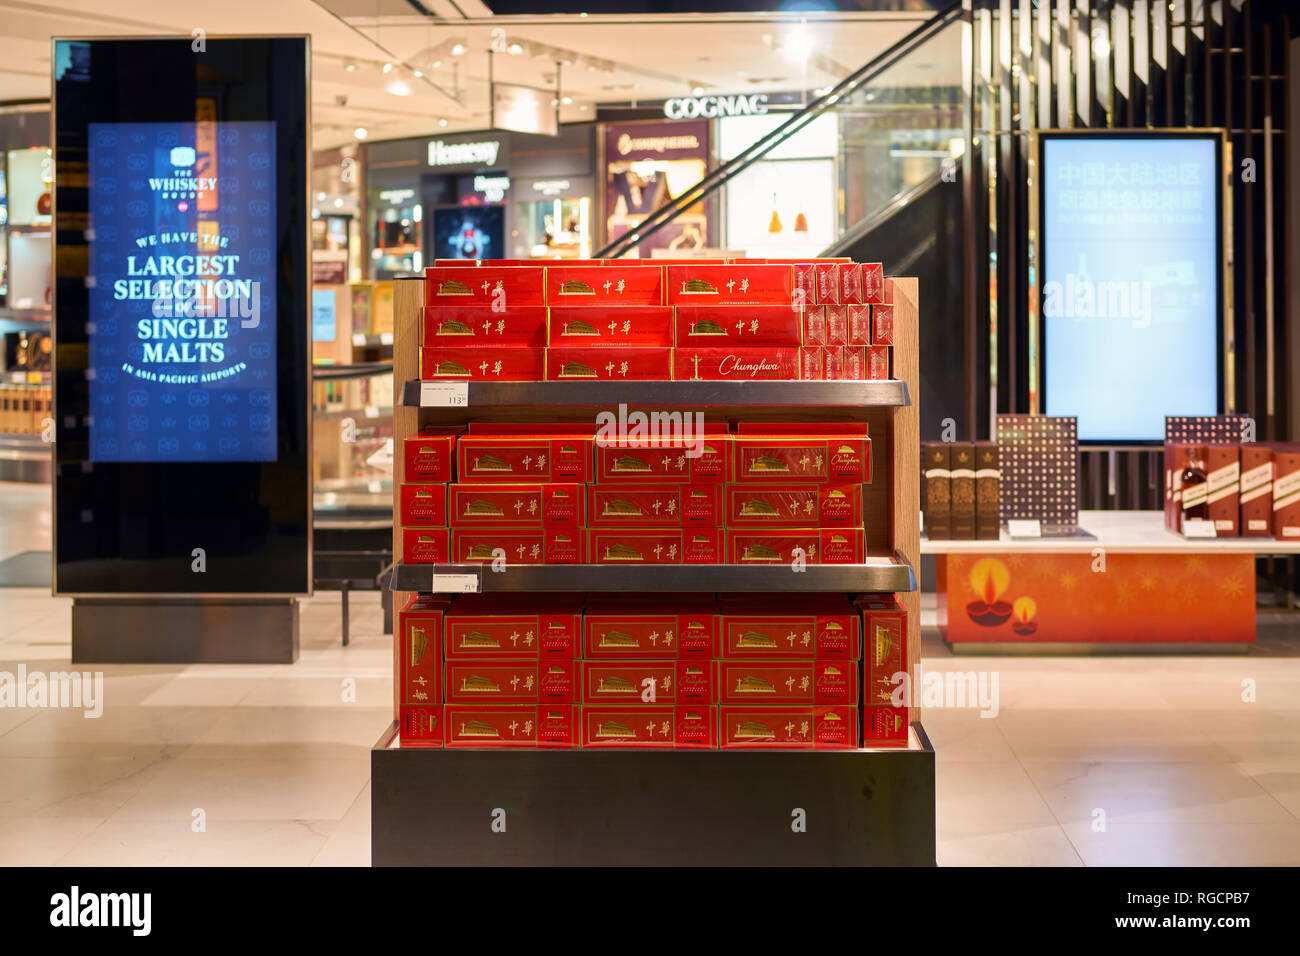 SINGAPORE - CIRCA SEPTEMBER, 2016: cigarettes on display at a store in Singapore Changi Airport. Changi Airport is one of the largest transportation h Stock Photo